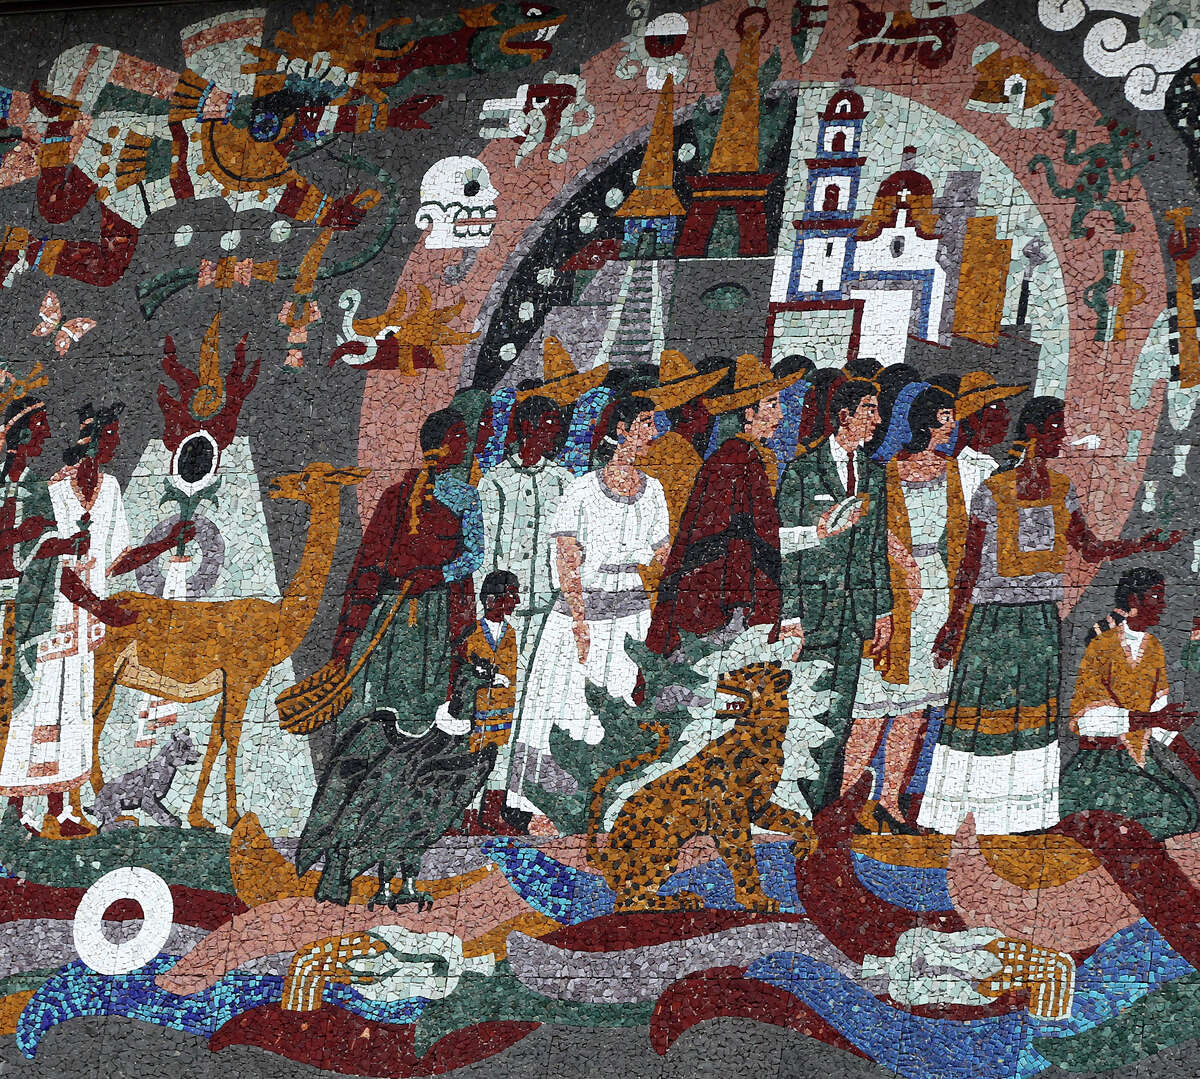 This is a section of the "Confluence of Civilization in the Americas" mural made of tile on the Henry B. Gonzalez Convention Center.